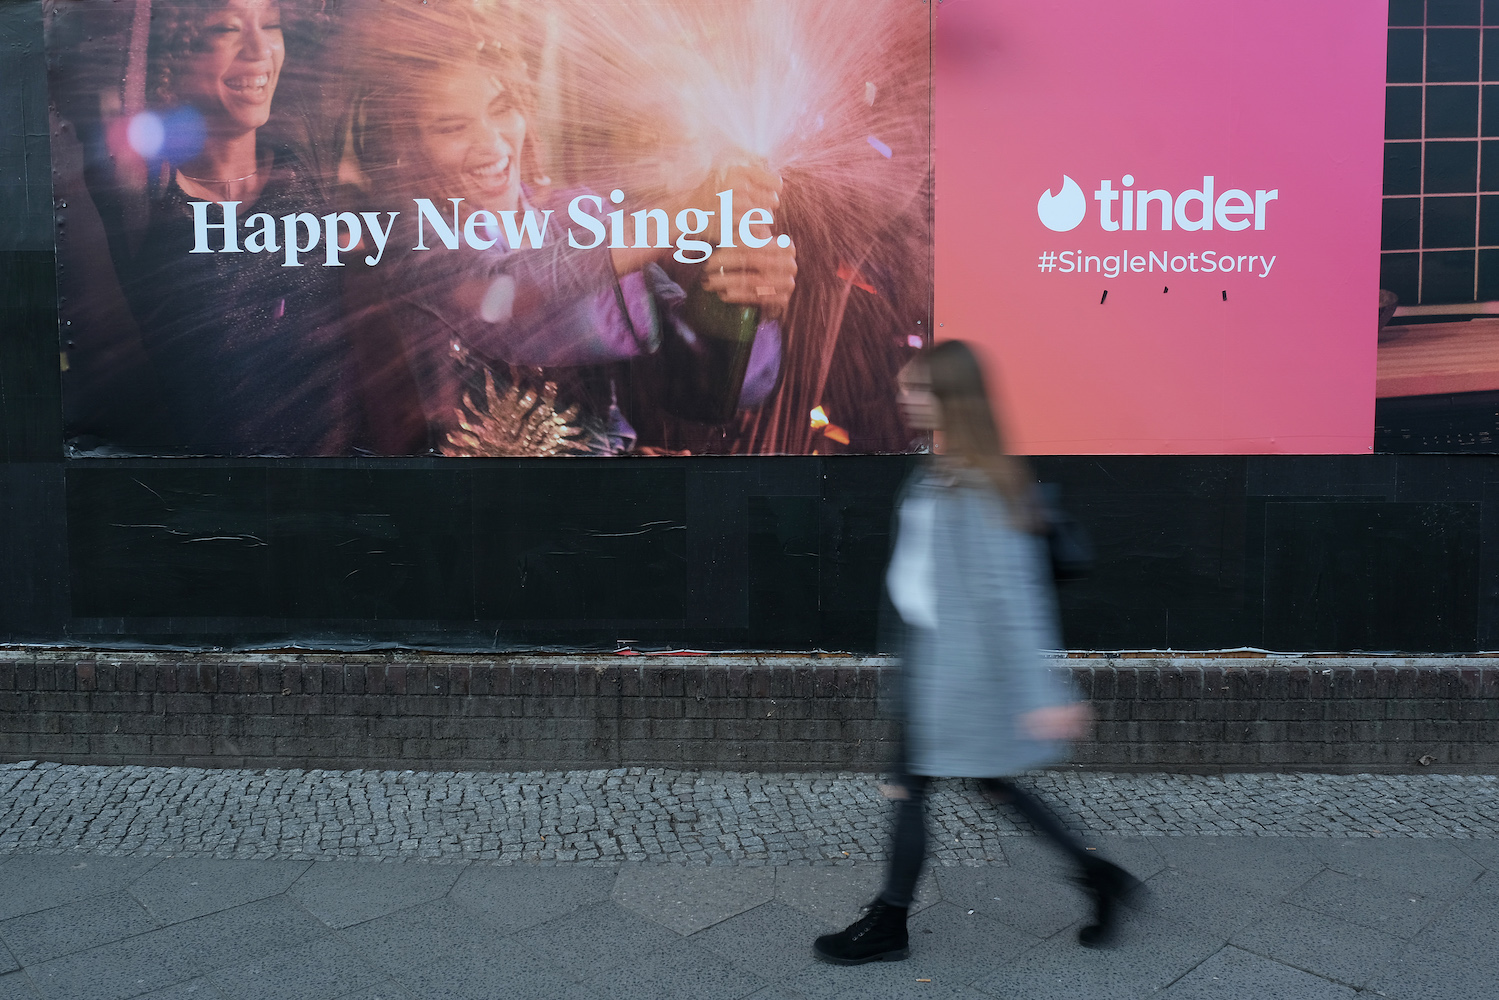 A young woman walks past a billboard advertisement for the dating app Tinder